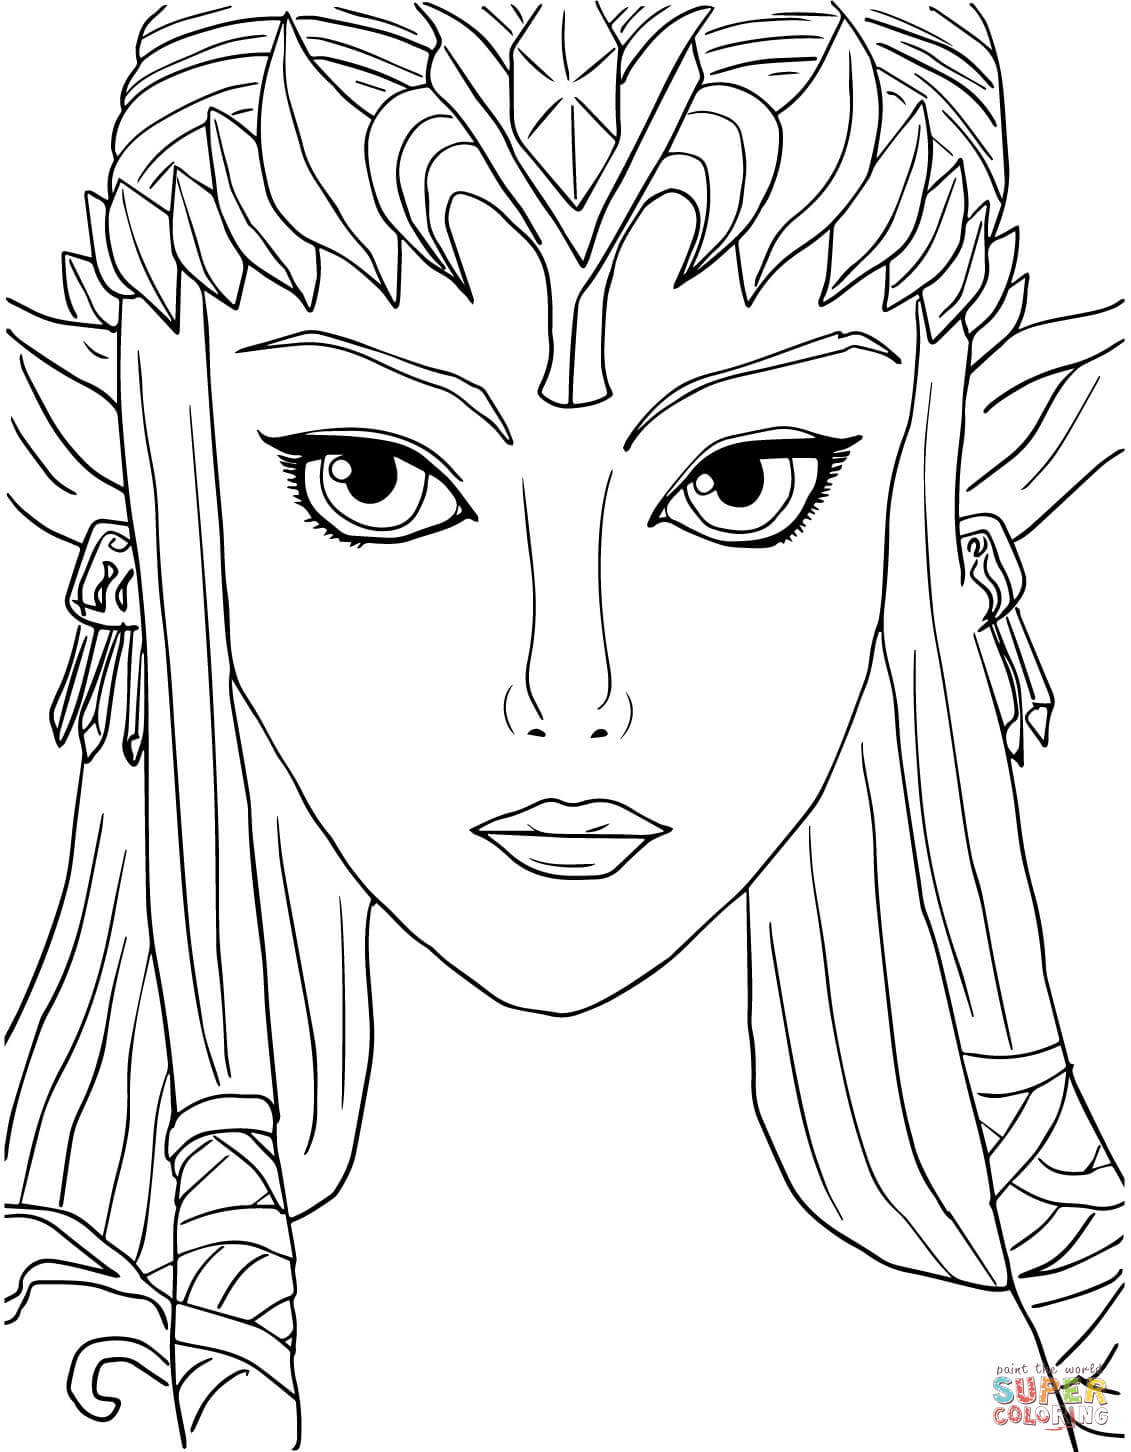 Legend of Zelda Twilight Princess coloring page | Free Printable Coloring  Pages